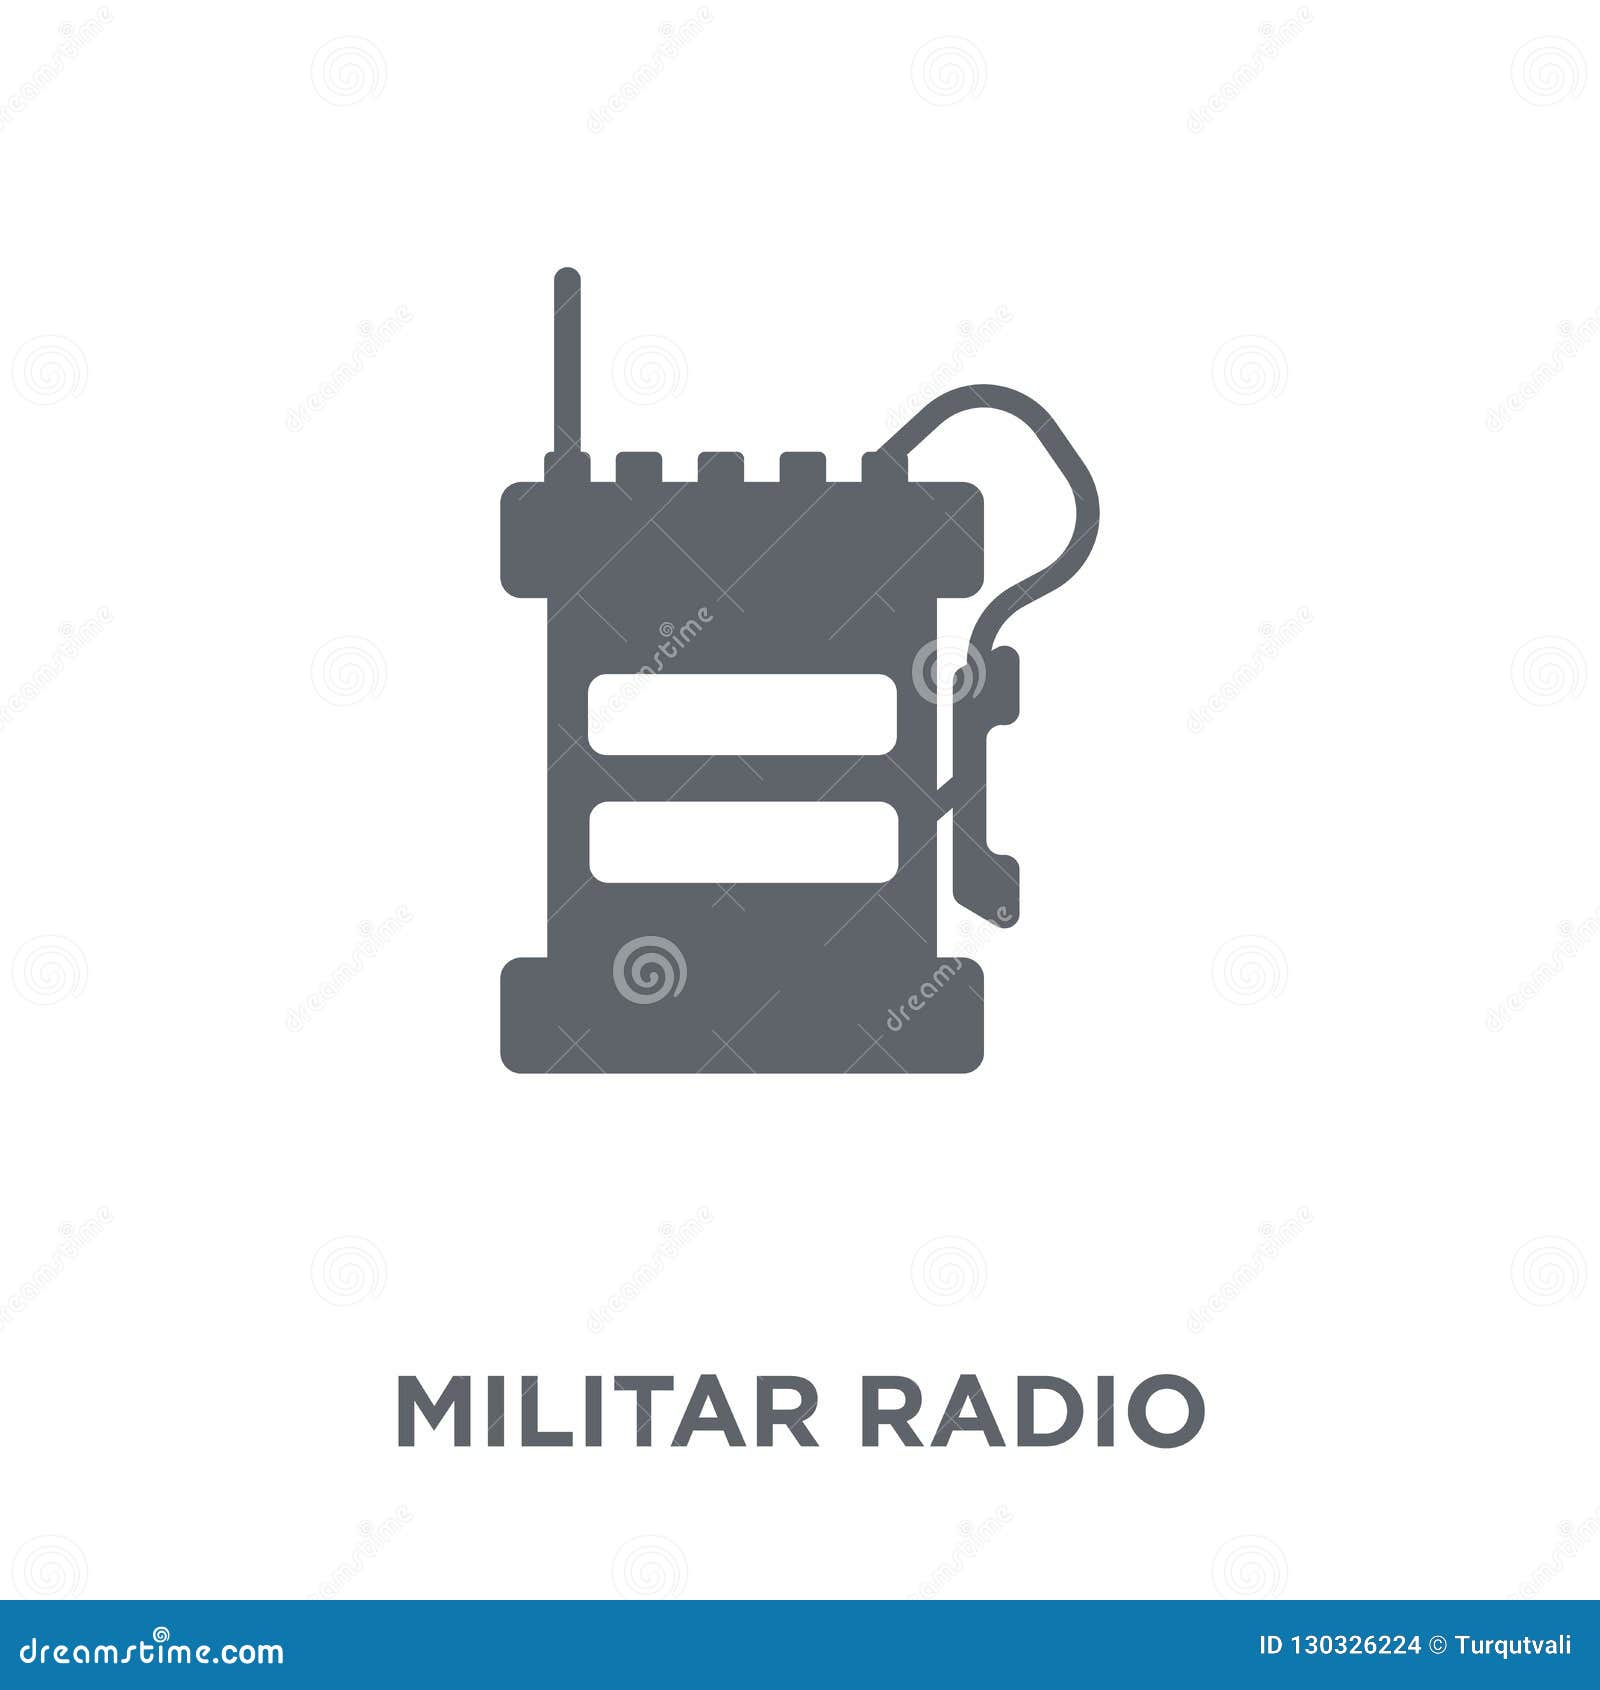 militar radio icon from army collection.